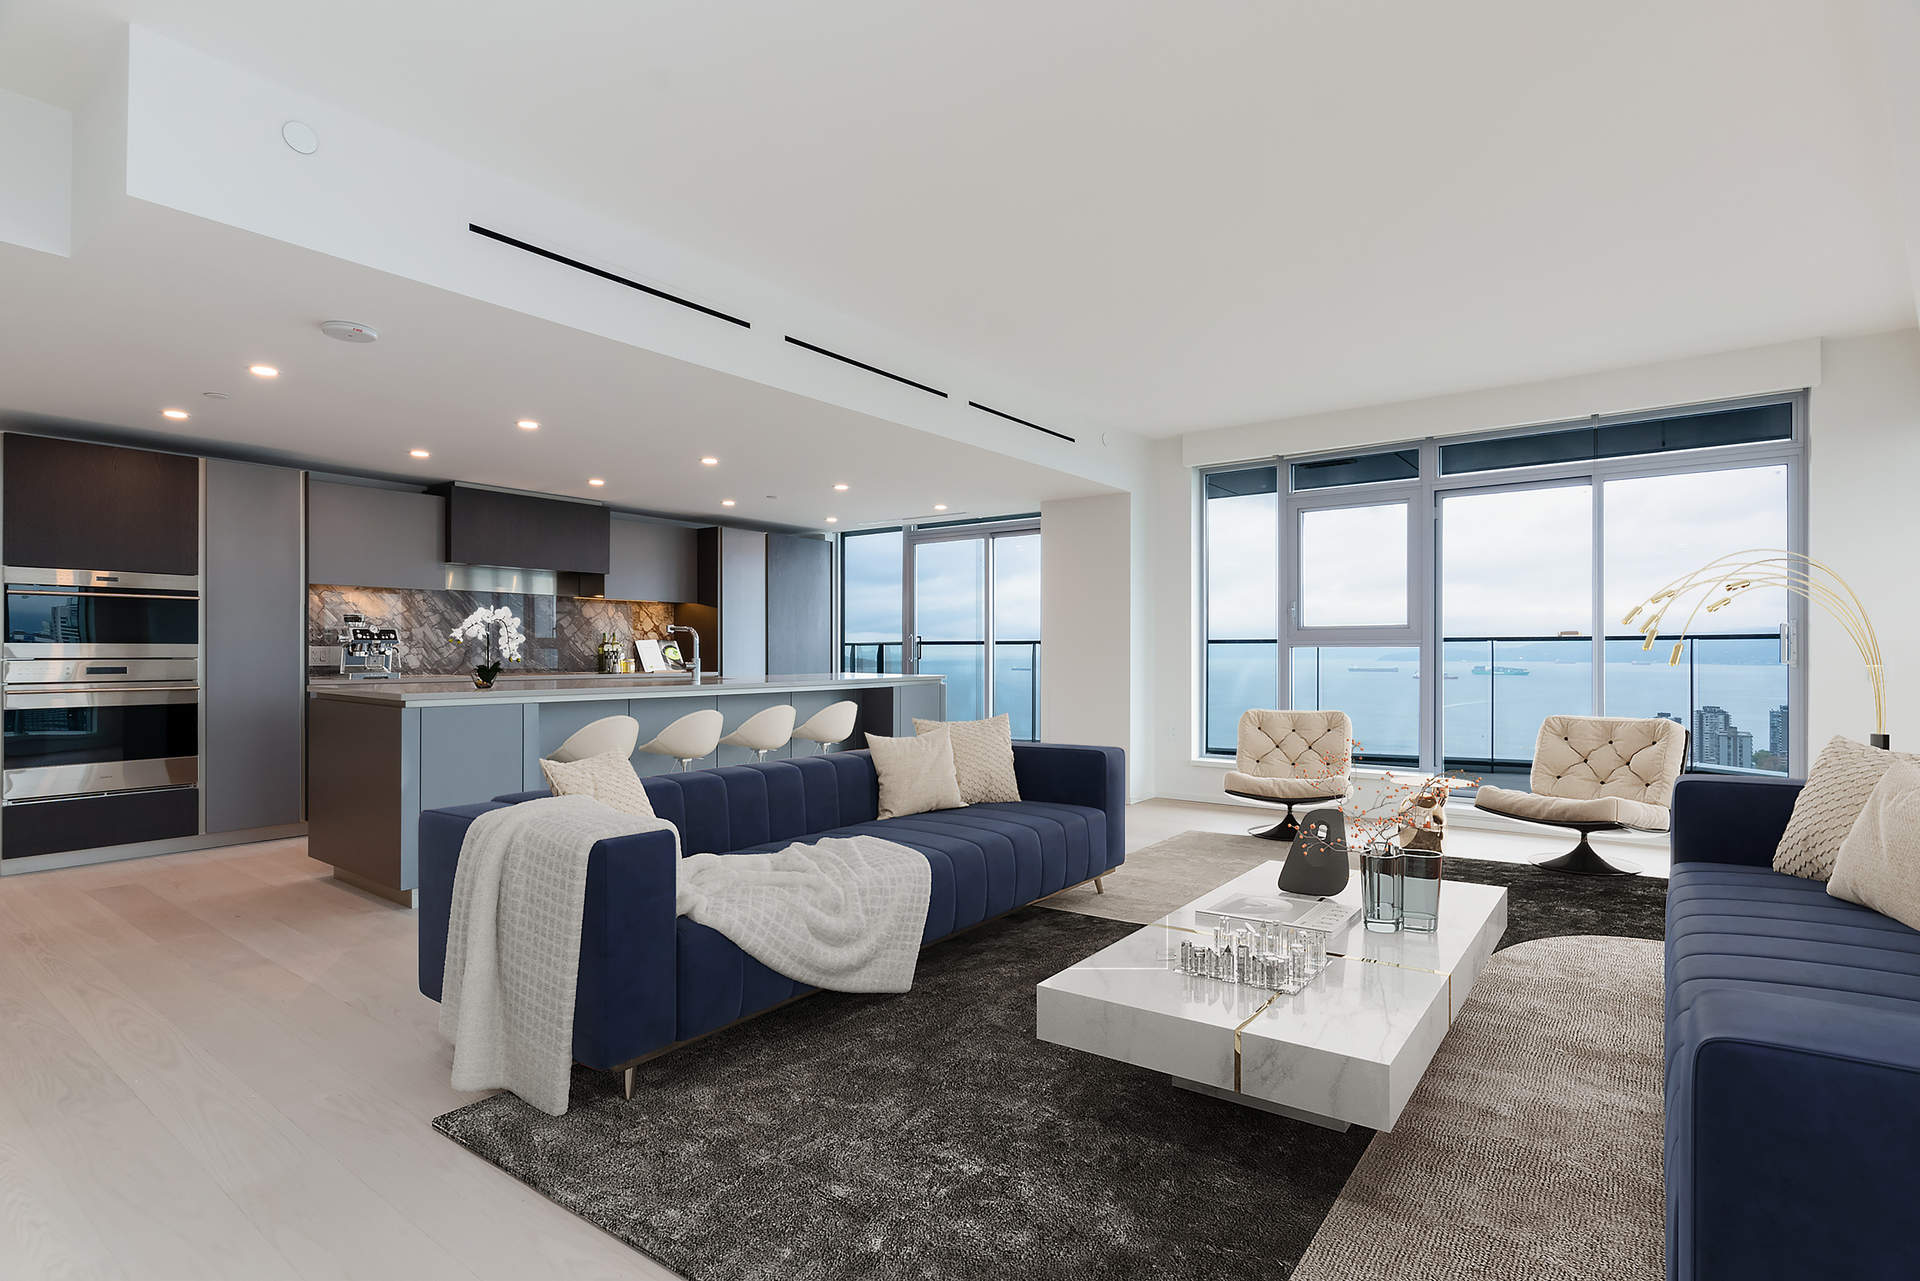 The Pacific by Grosvenor – Penthouse 02, 2,773 sf - 1,020 sf of roof terrace! 